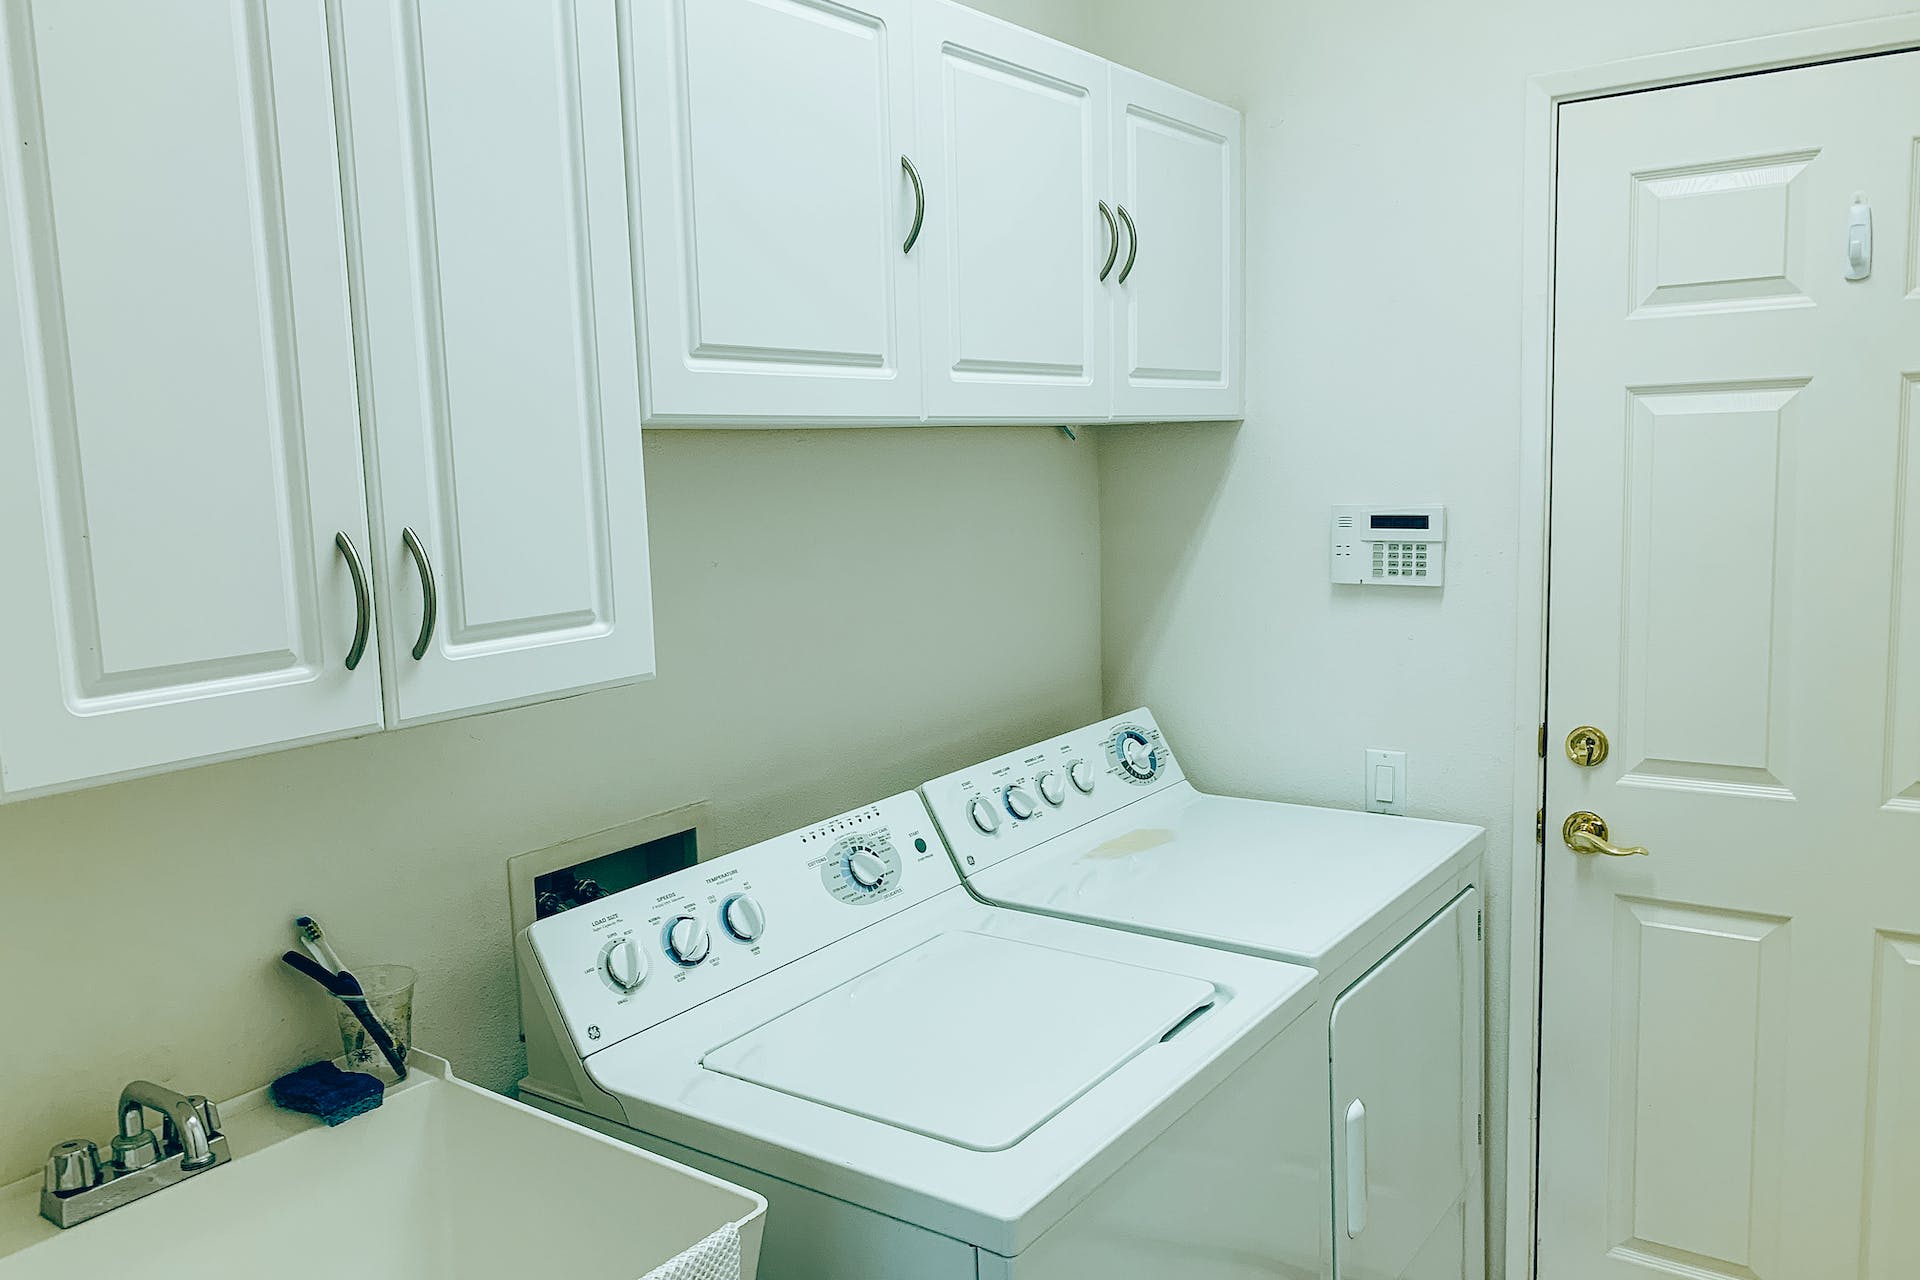 Laundry room with a top loading washing machine